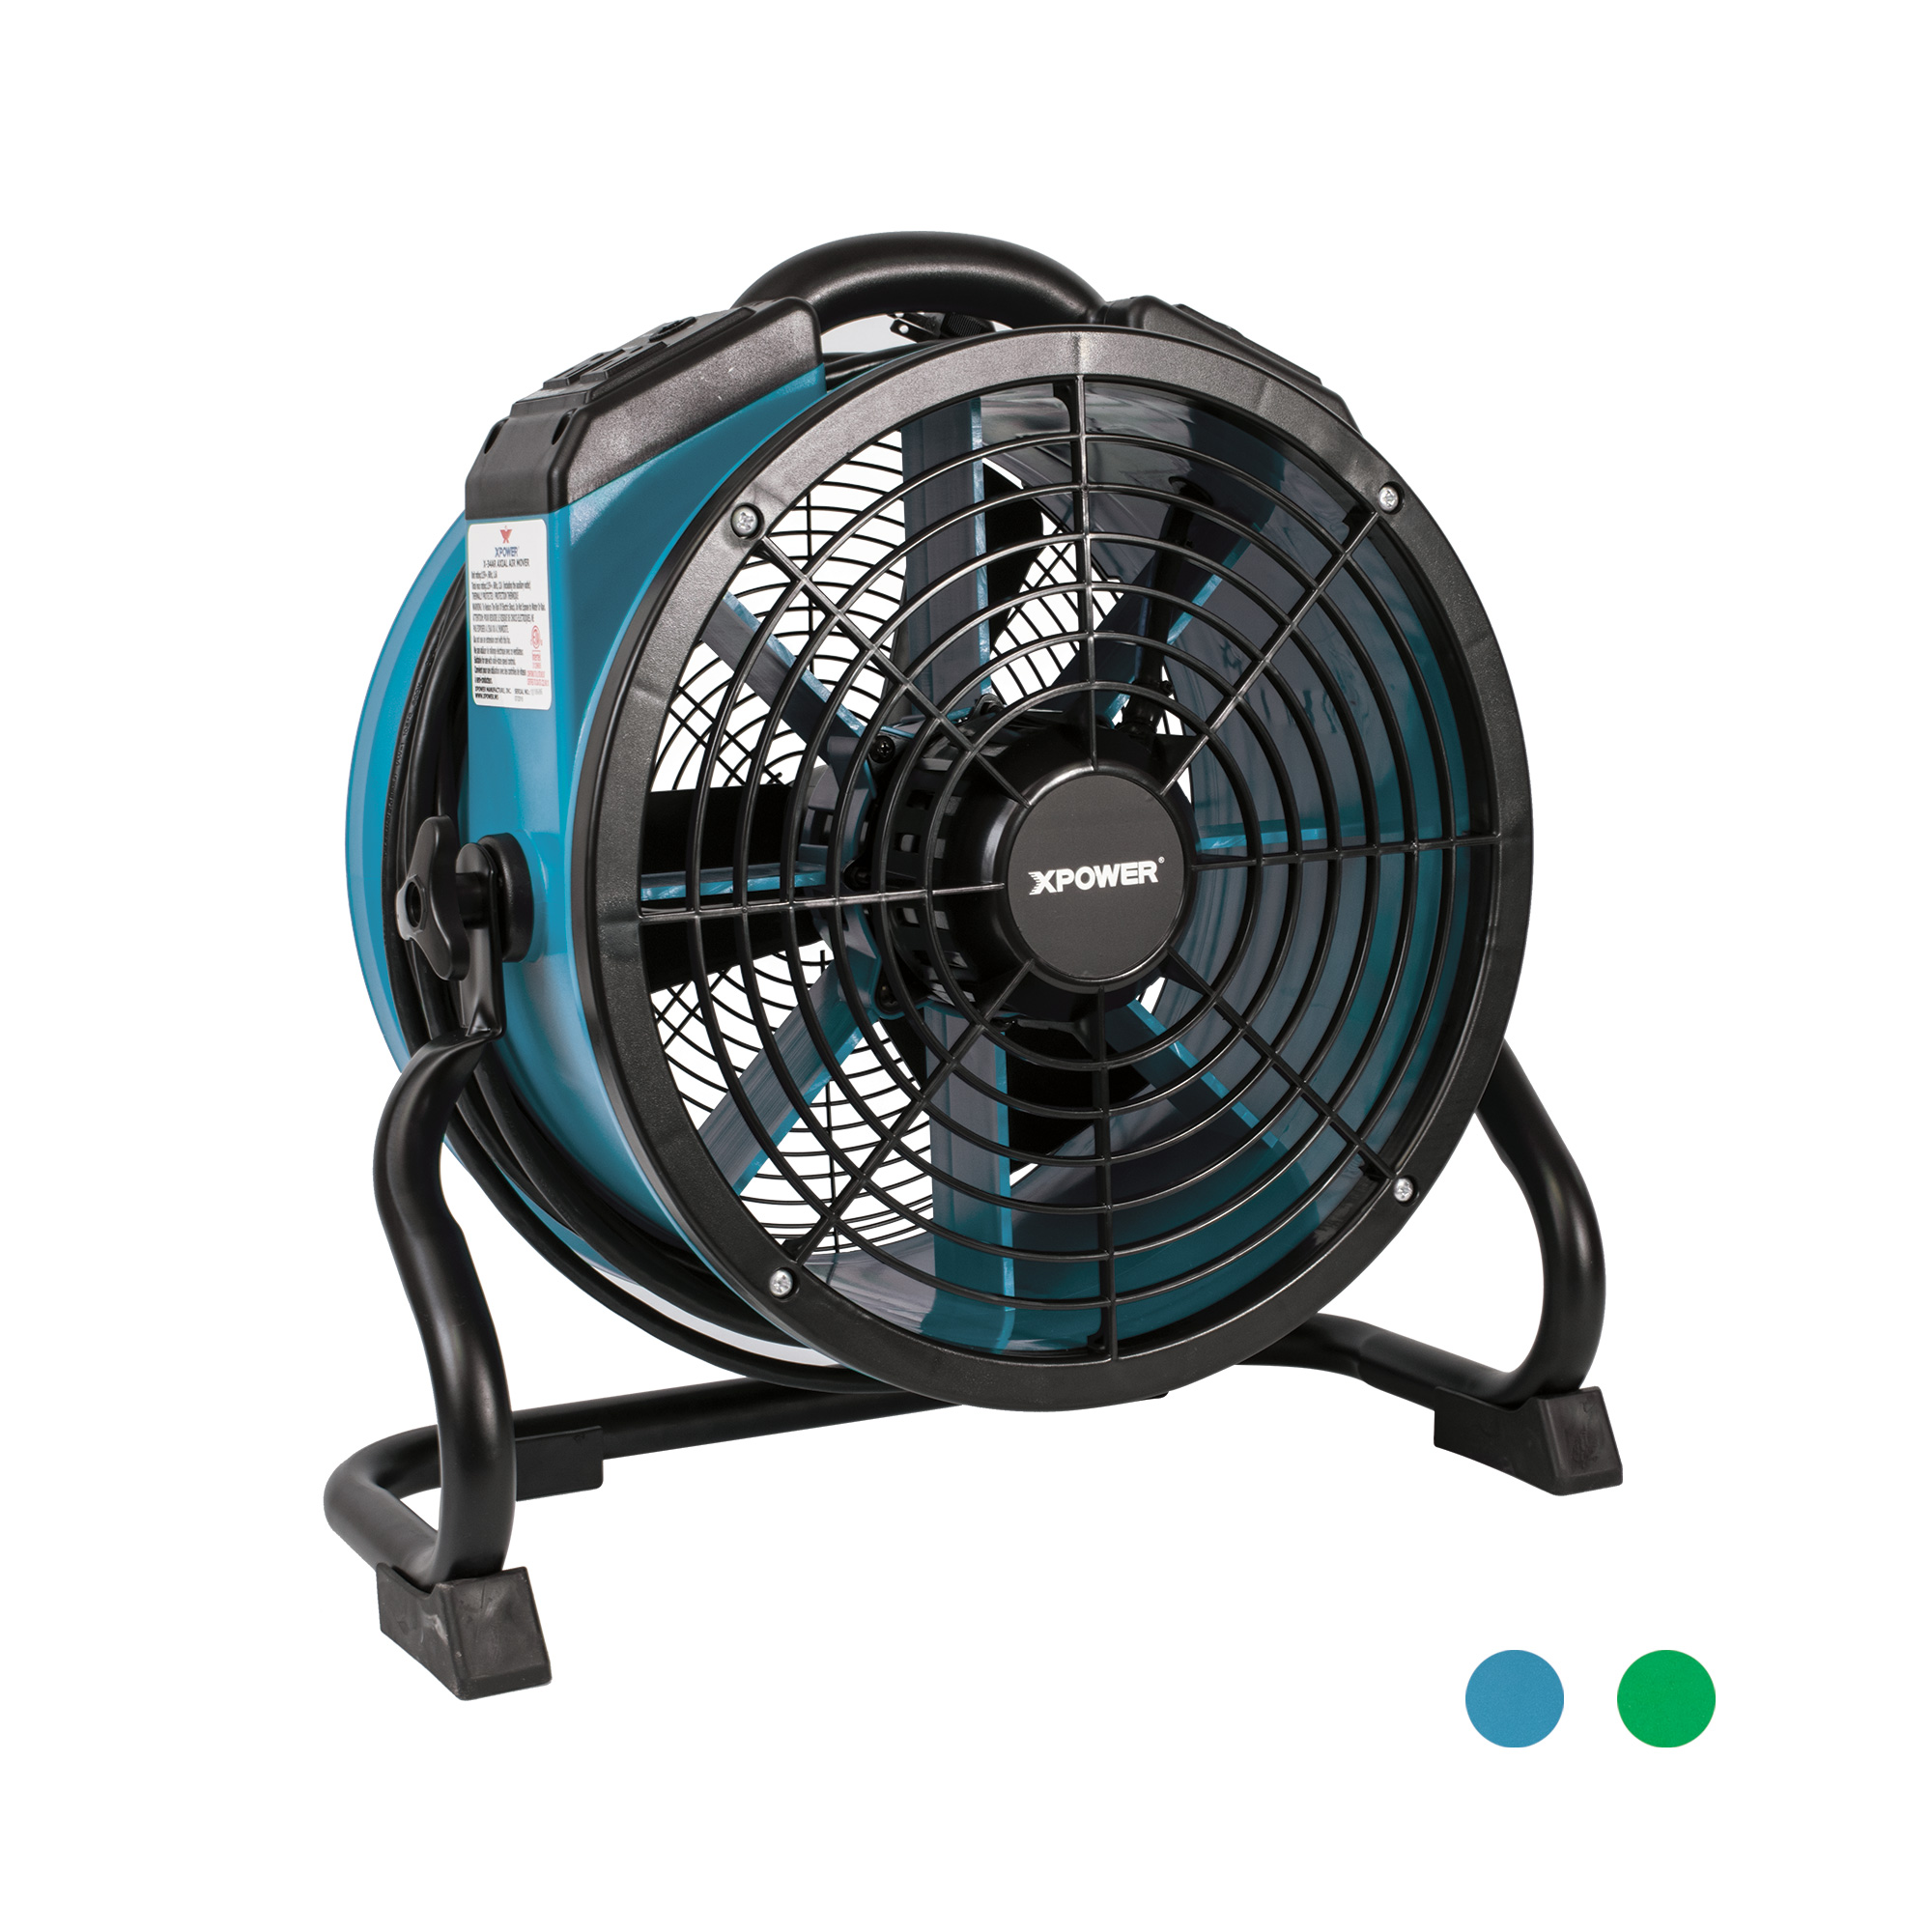 XPOWER X-34AR 1720 CFM Industrial Sealed Motor Axial Fan Air Mover w Outlets 